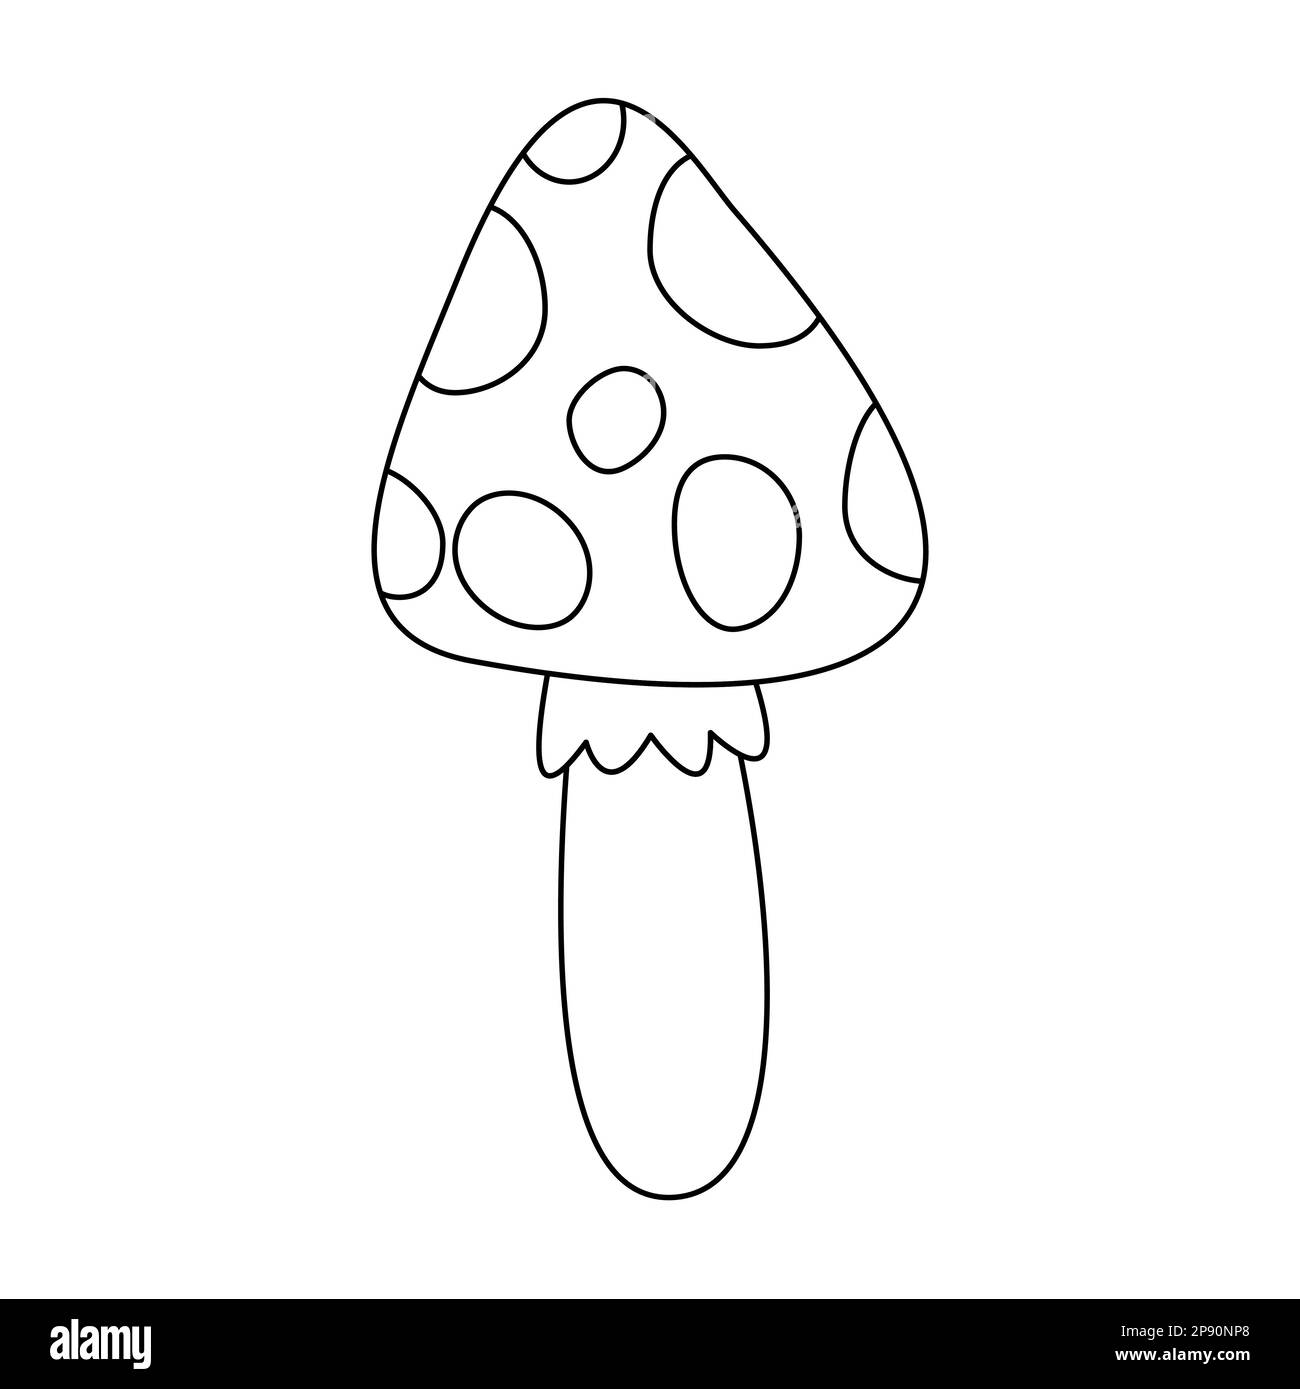 Mushroom with dots, Amanita poisonous, doodle style flat vector outline illustration for kids coloring book Stock Vector